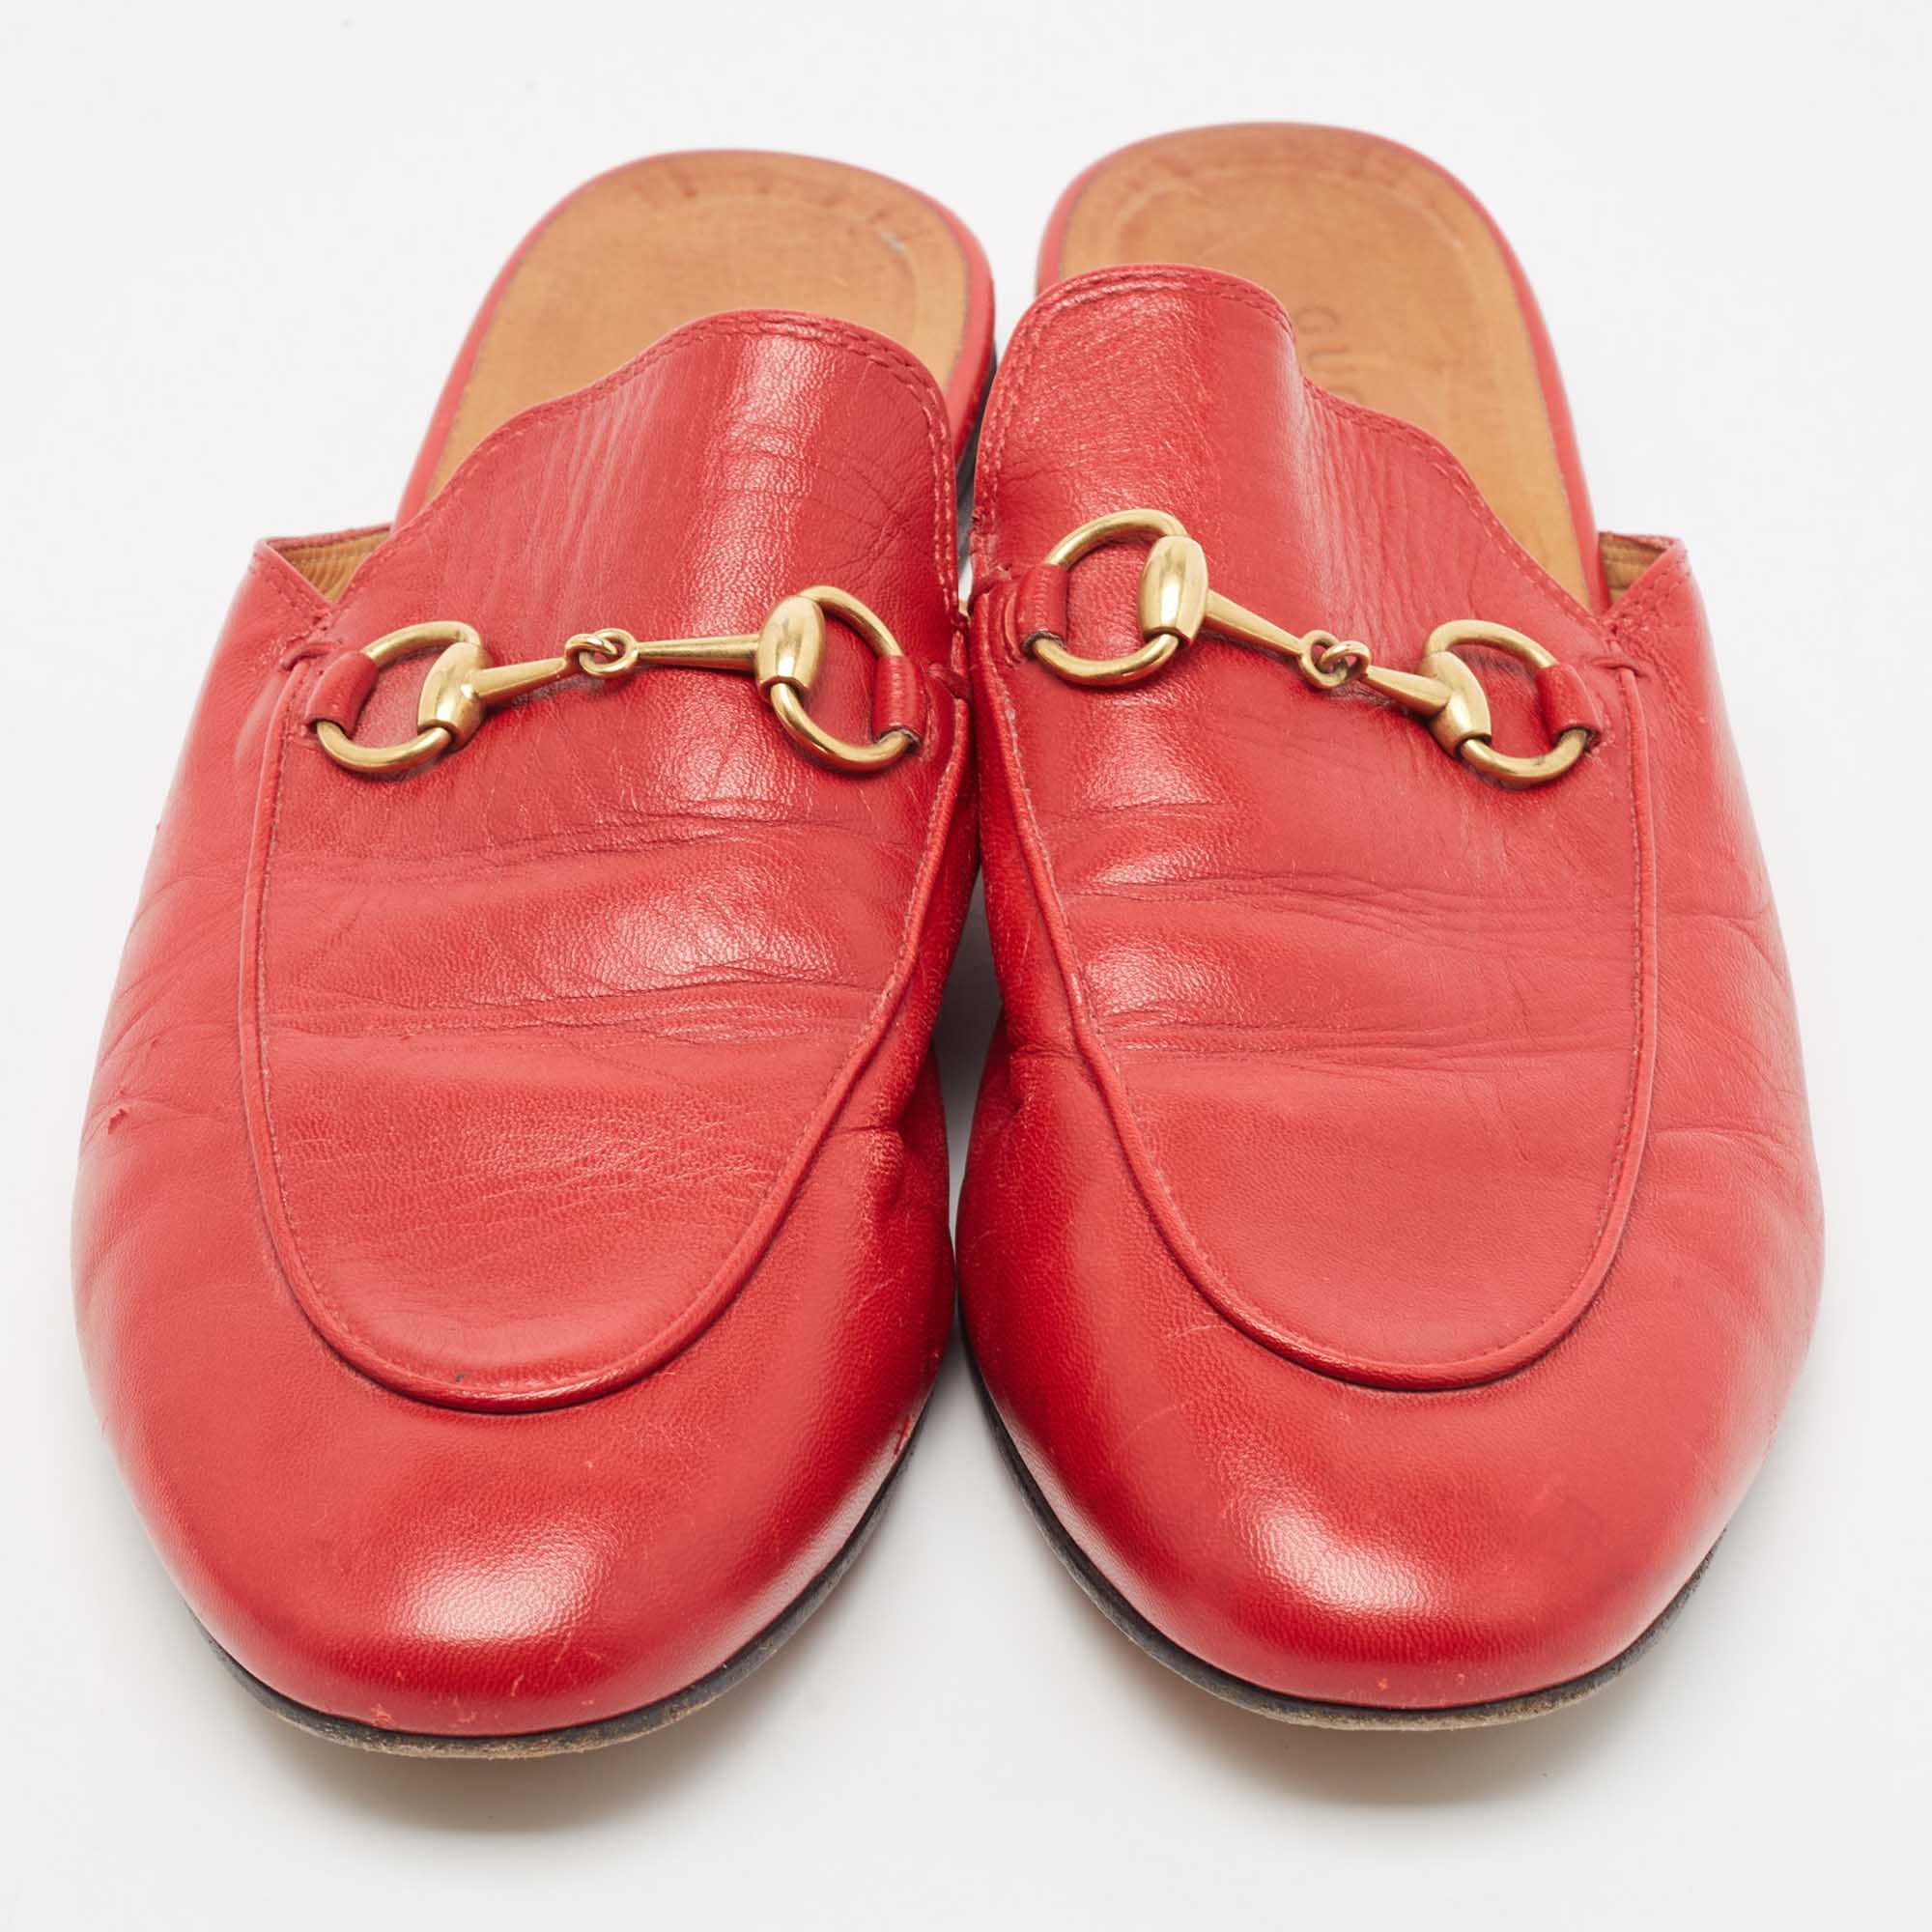 Gucci Red Leather Princetown Flat Mules Size 38.5